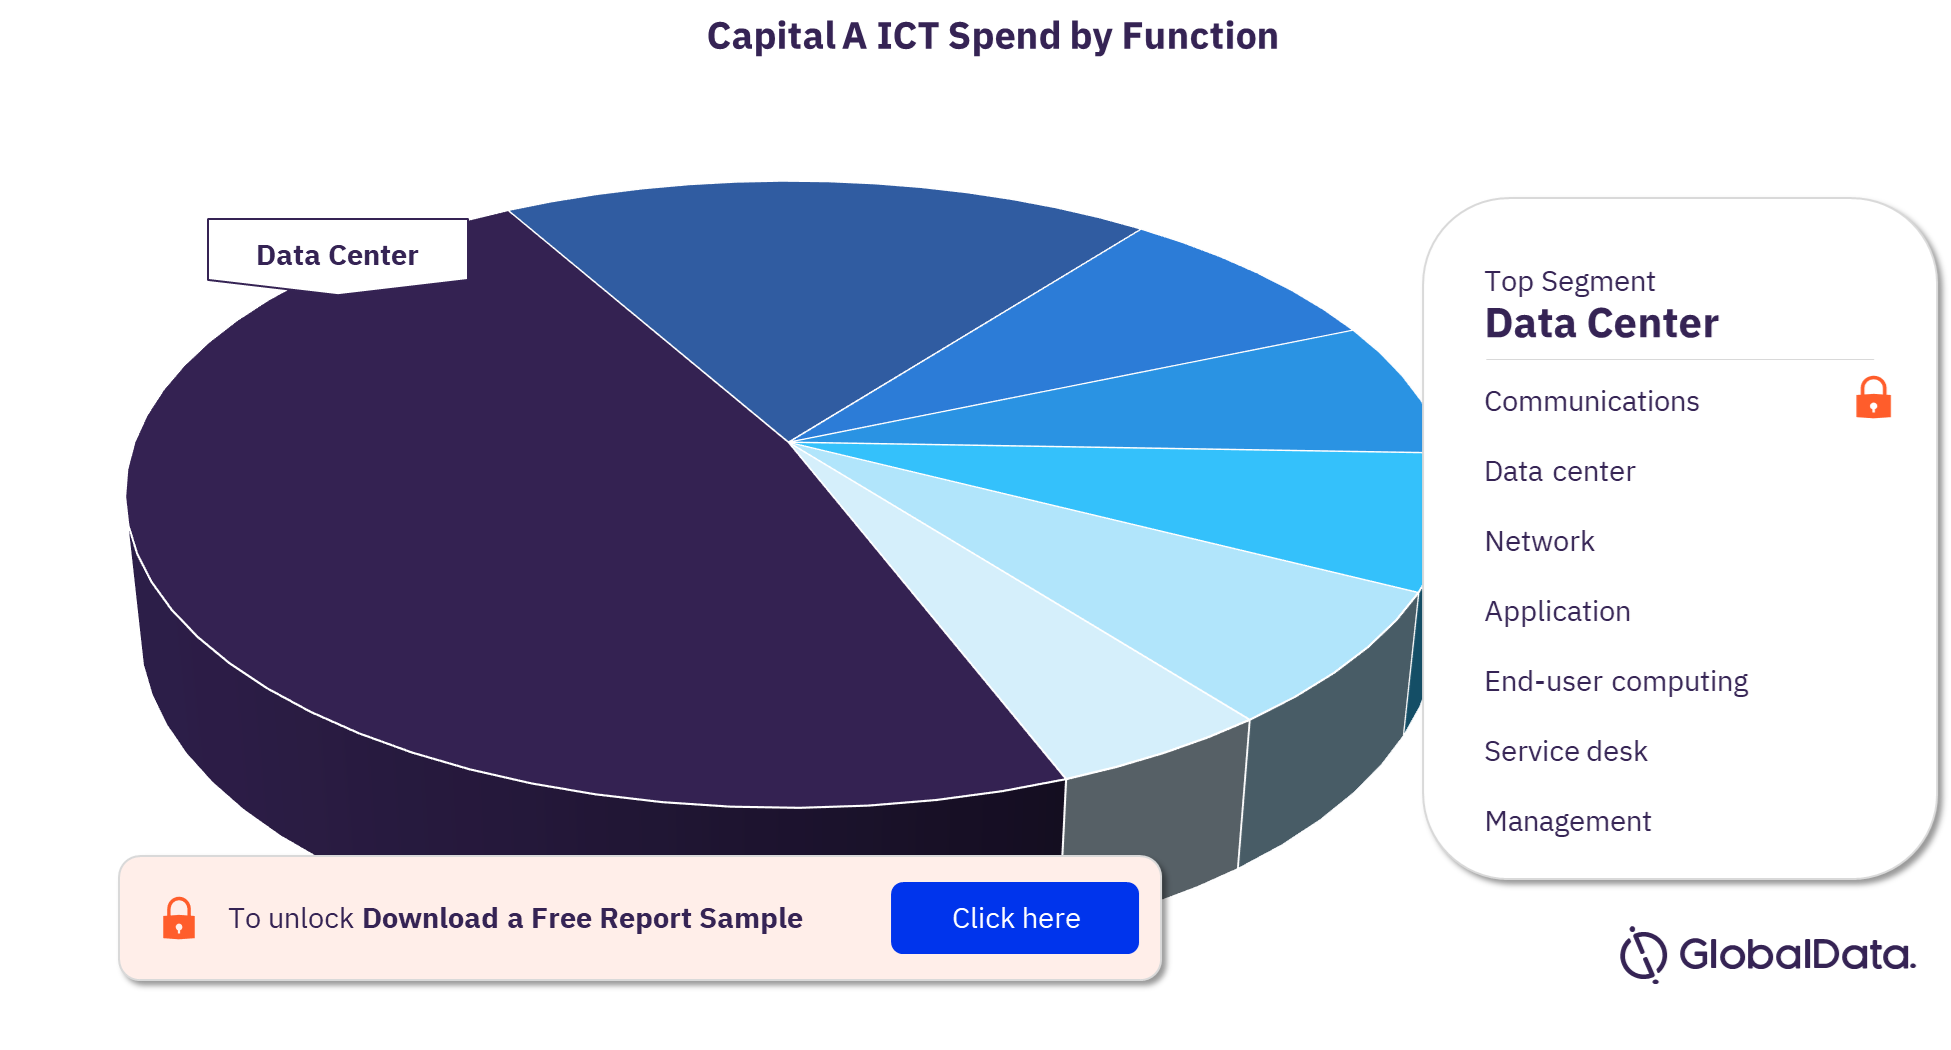 Capital A ICT Spend by Function 